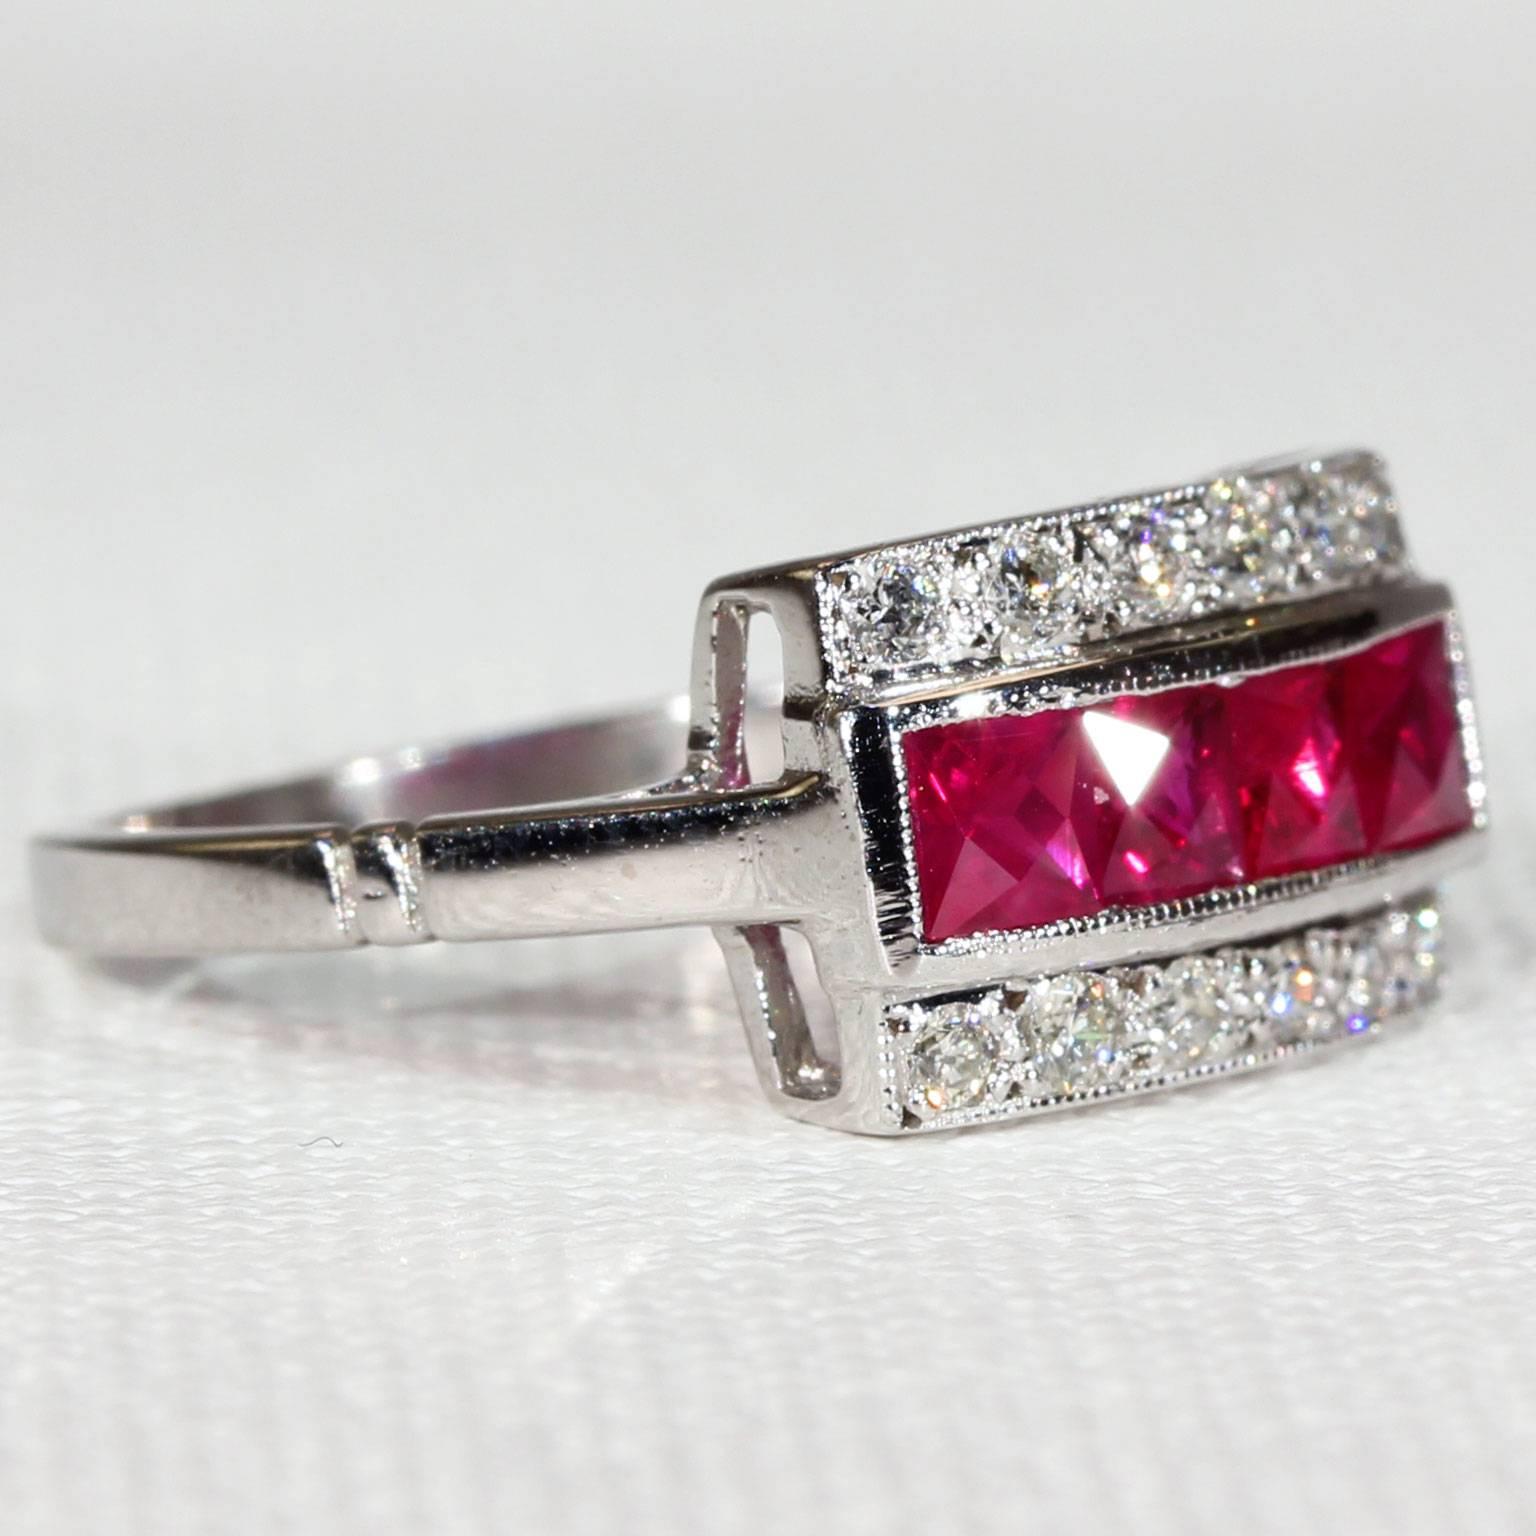 This vintage ruby and diamond ring was handcrafted around 1980 in 18 karat white gold. The ring features a row of four square cut deep pink rubies between two rows of diamonds, each row consisting of 6 transitional cut round stones. The rubies total